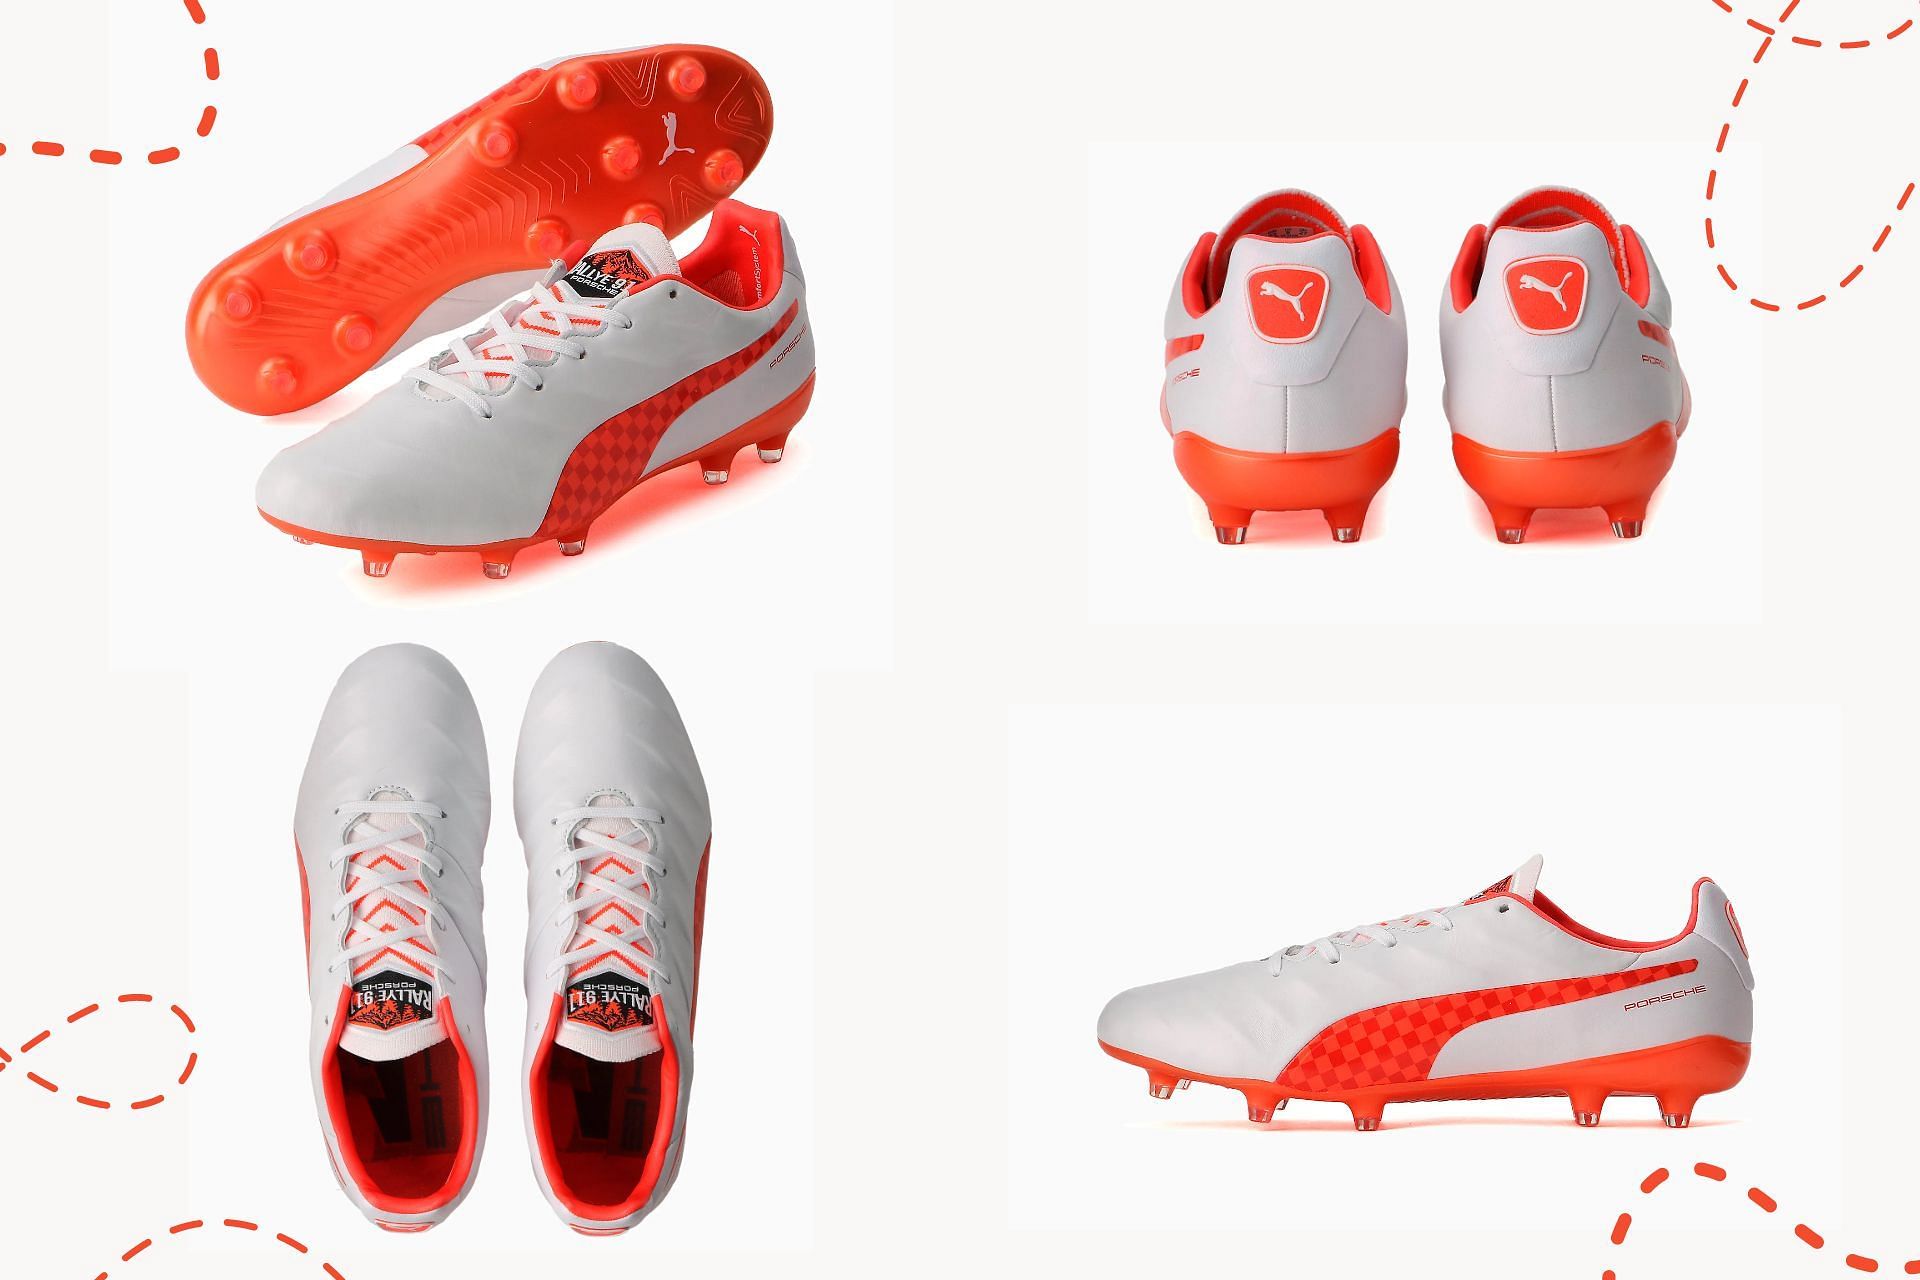 Newly released Puma King Platinum 21 Rallye football boots which honor the Porsche 911&rsquo;s motorsport legacy (Image via Sportskeeda)